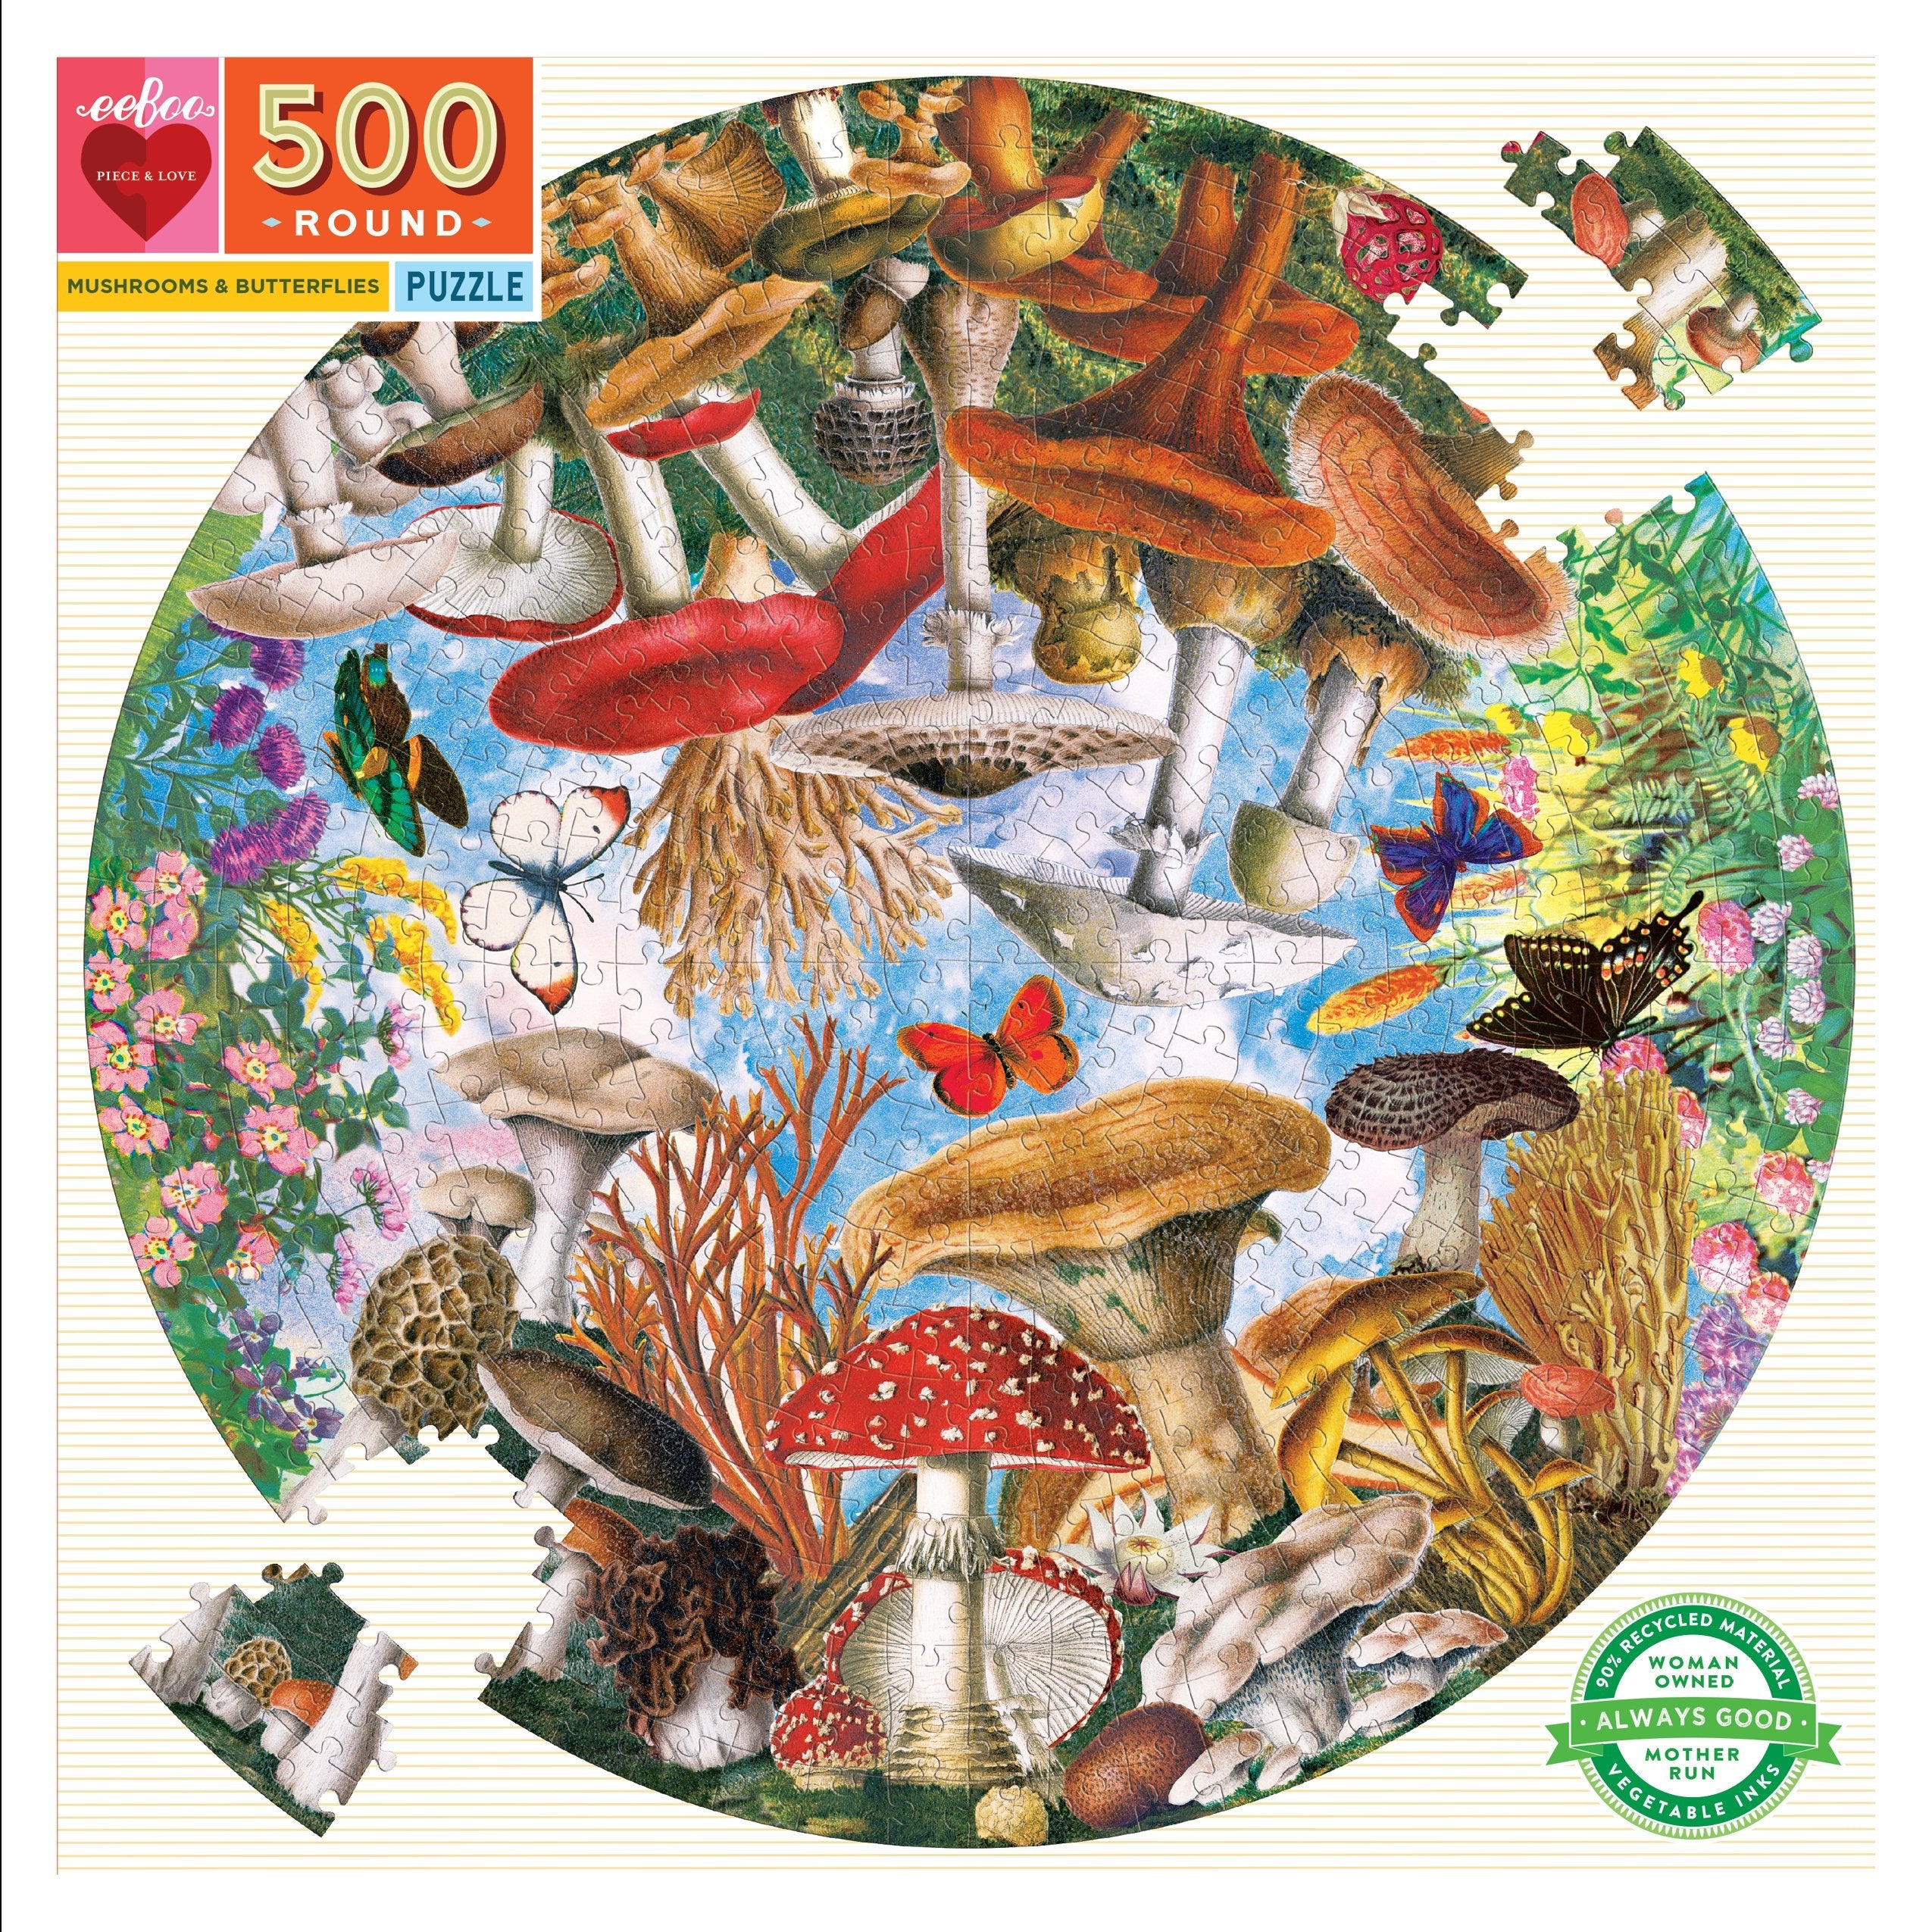 Mushroom and Butterflies 500 Piece Round Puzzle